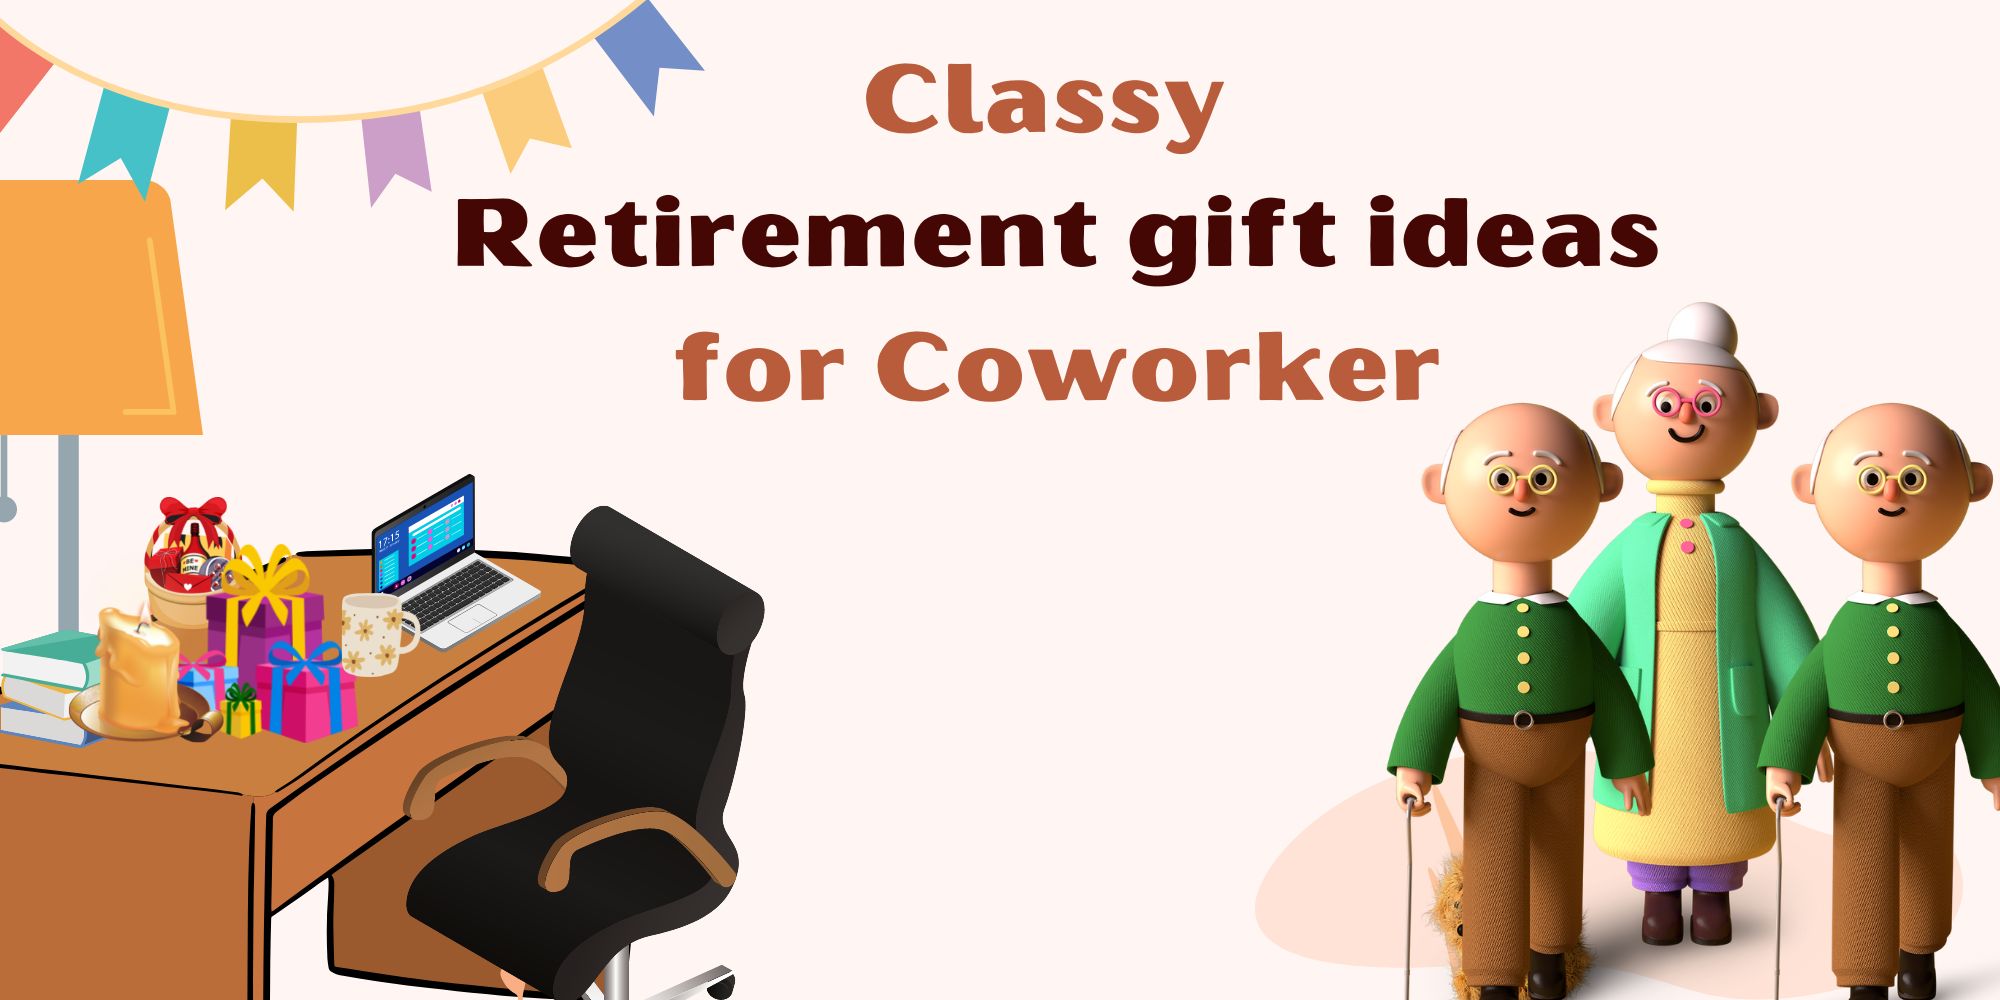 Retirement gift ideas for coworker